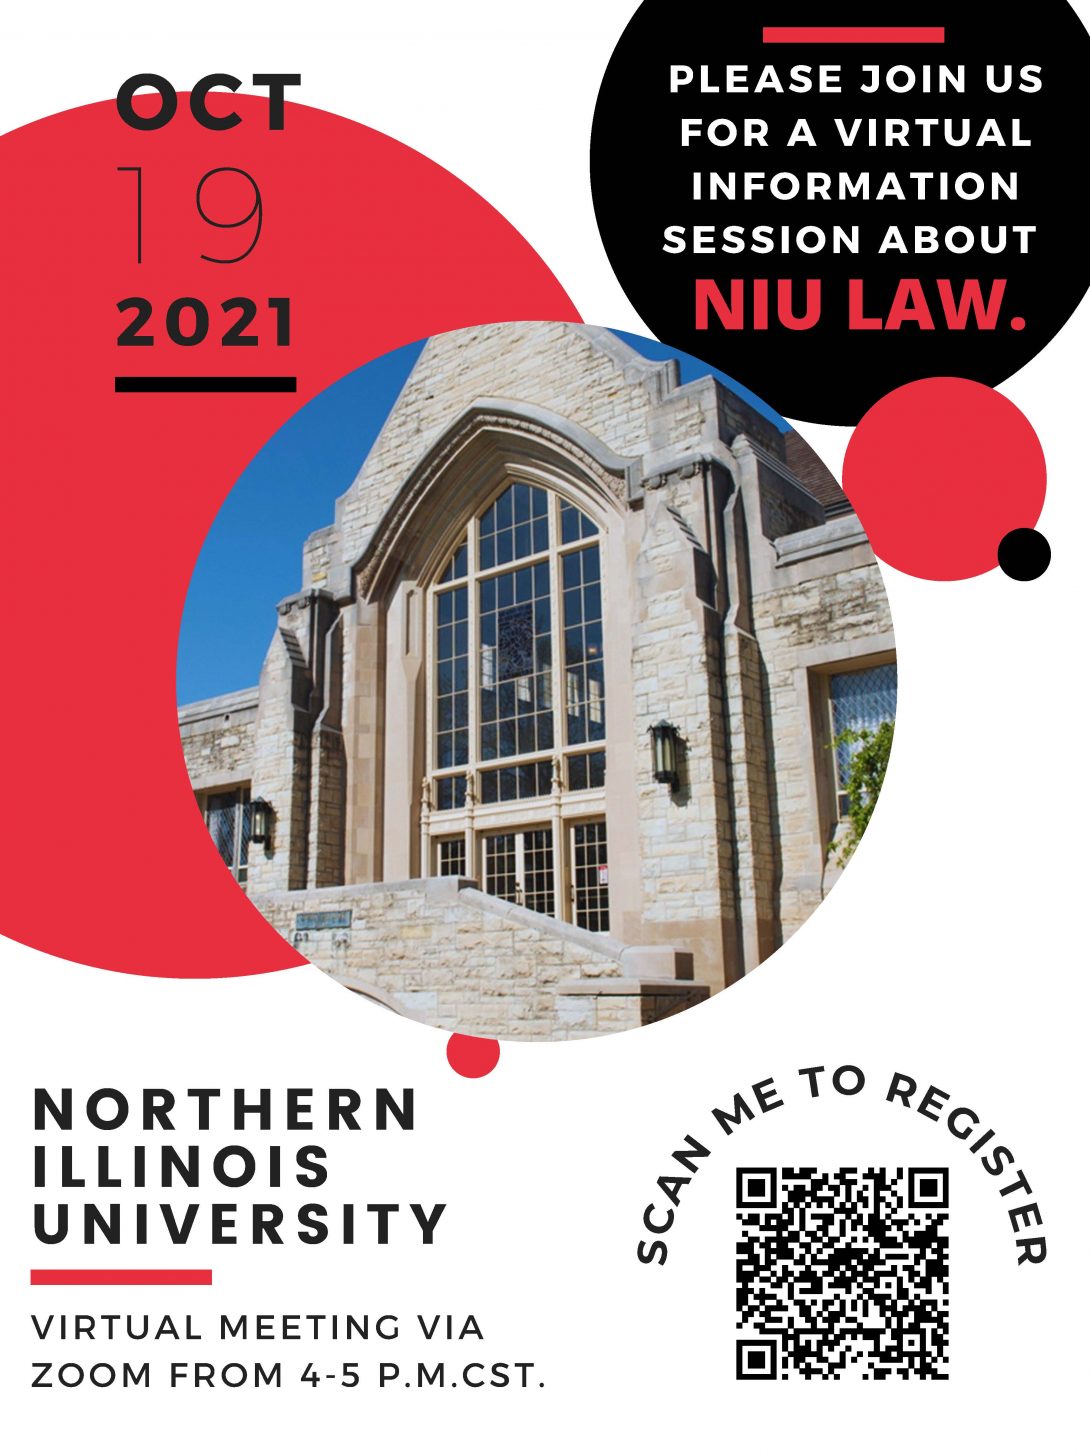 Niu flyer and QR code